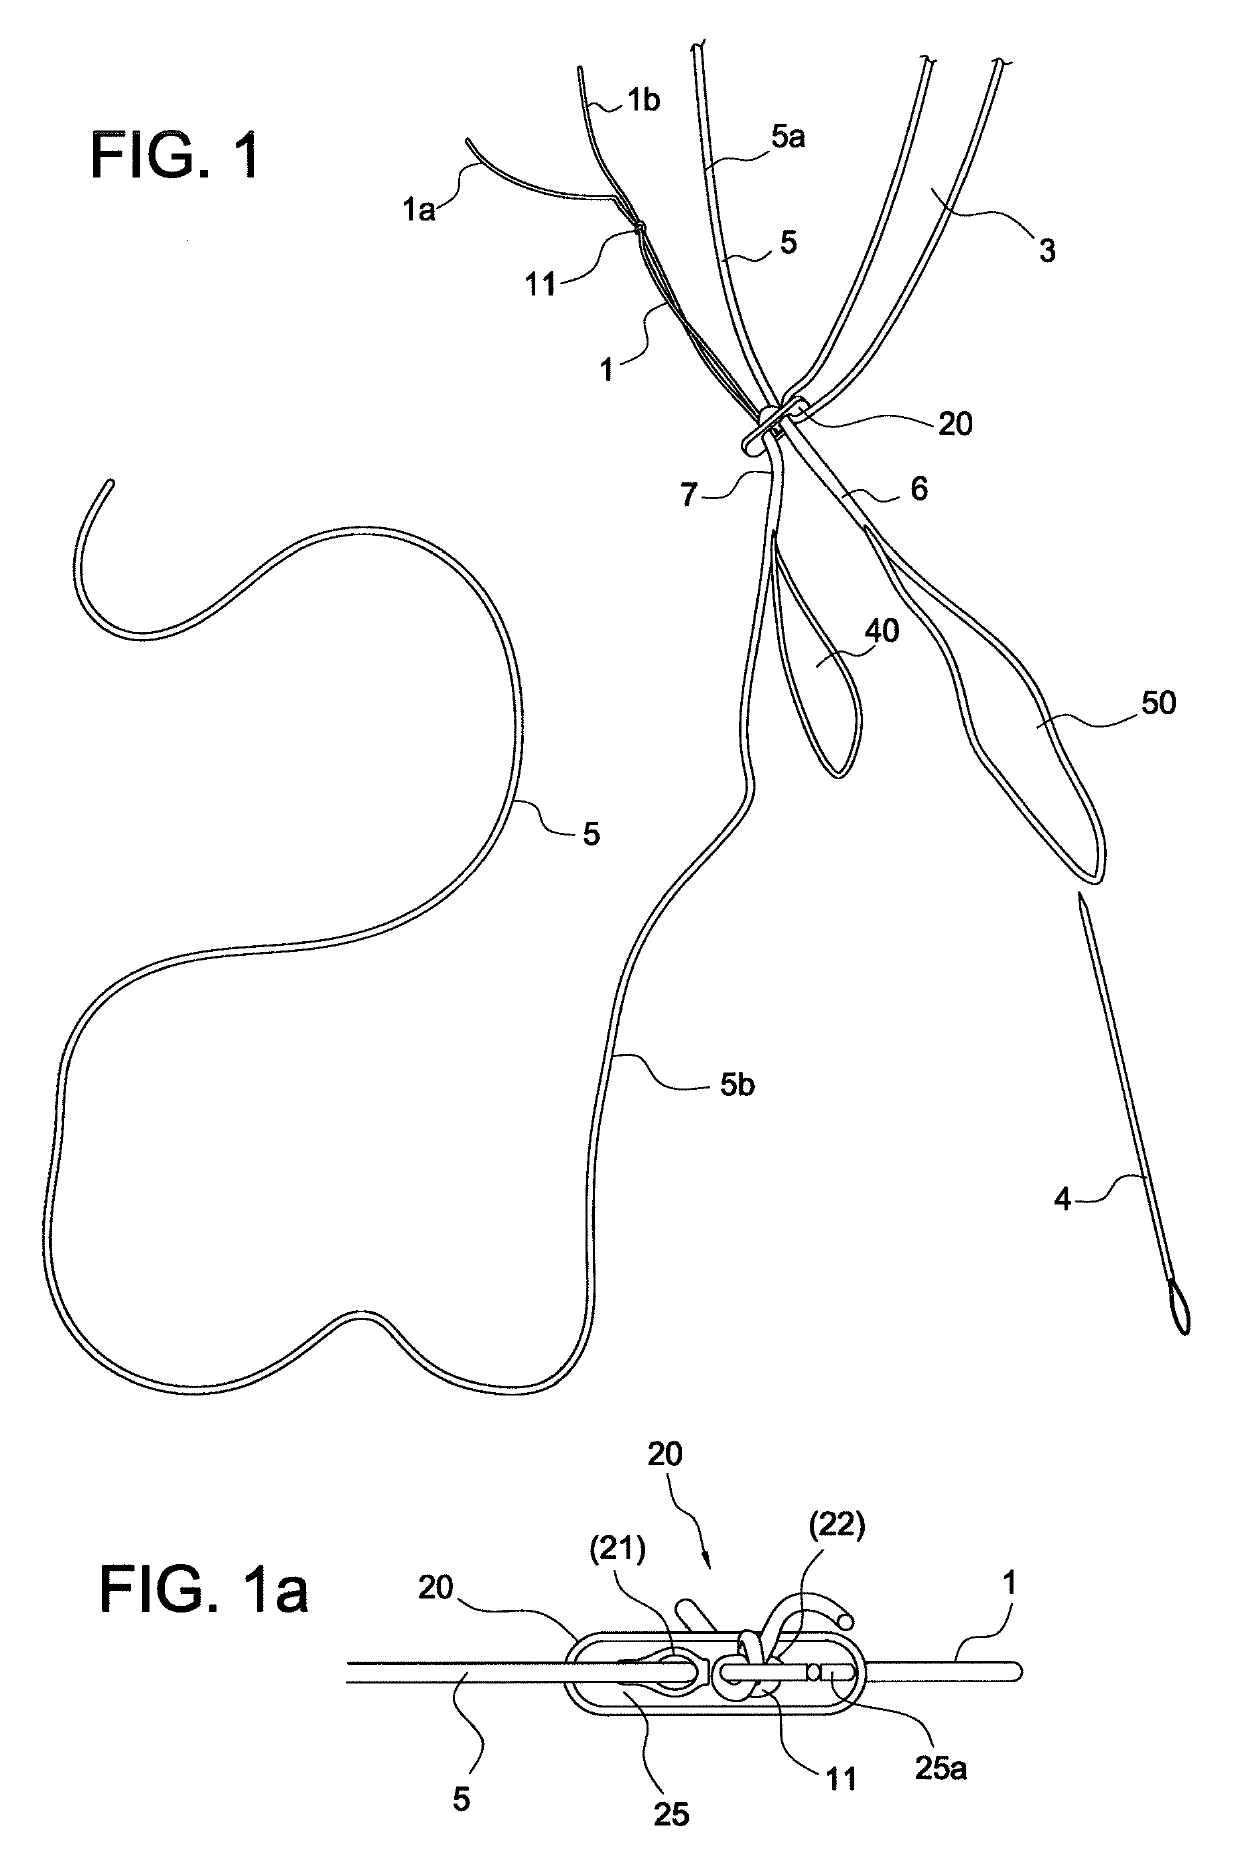 Adjustable self-locking loop constructs for tissue repairs and reconstructions